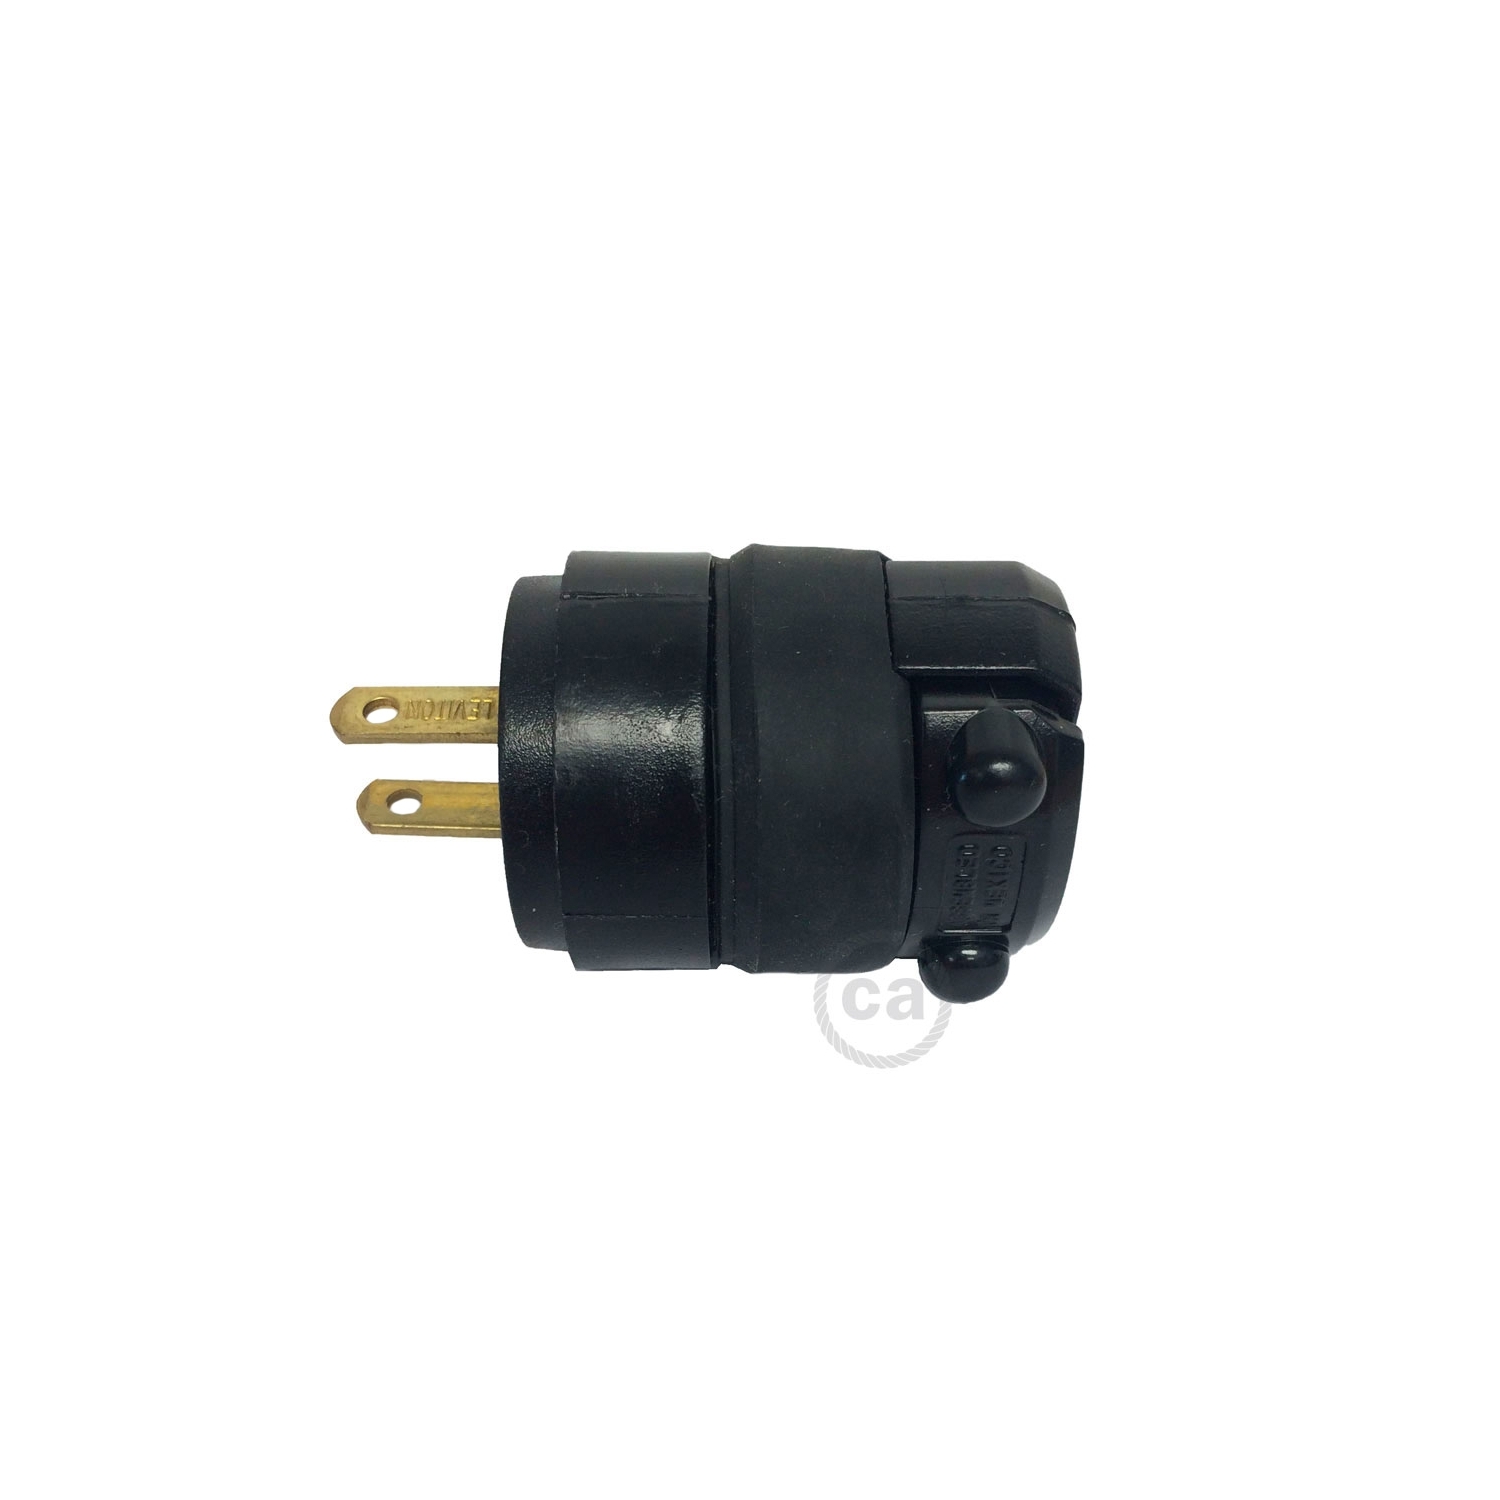 Black Rubberized Two Prong Plug for string lights